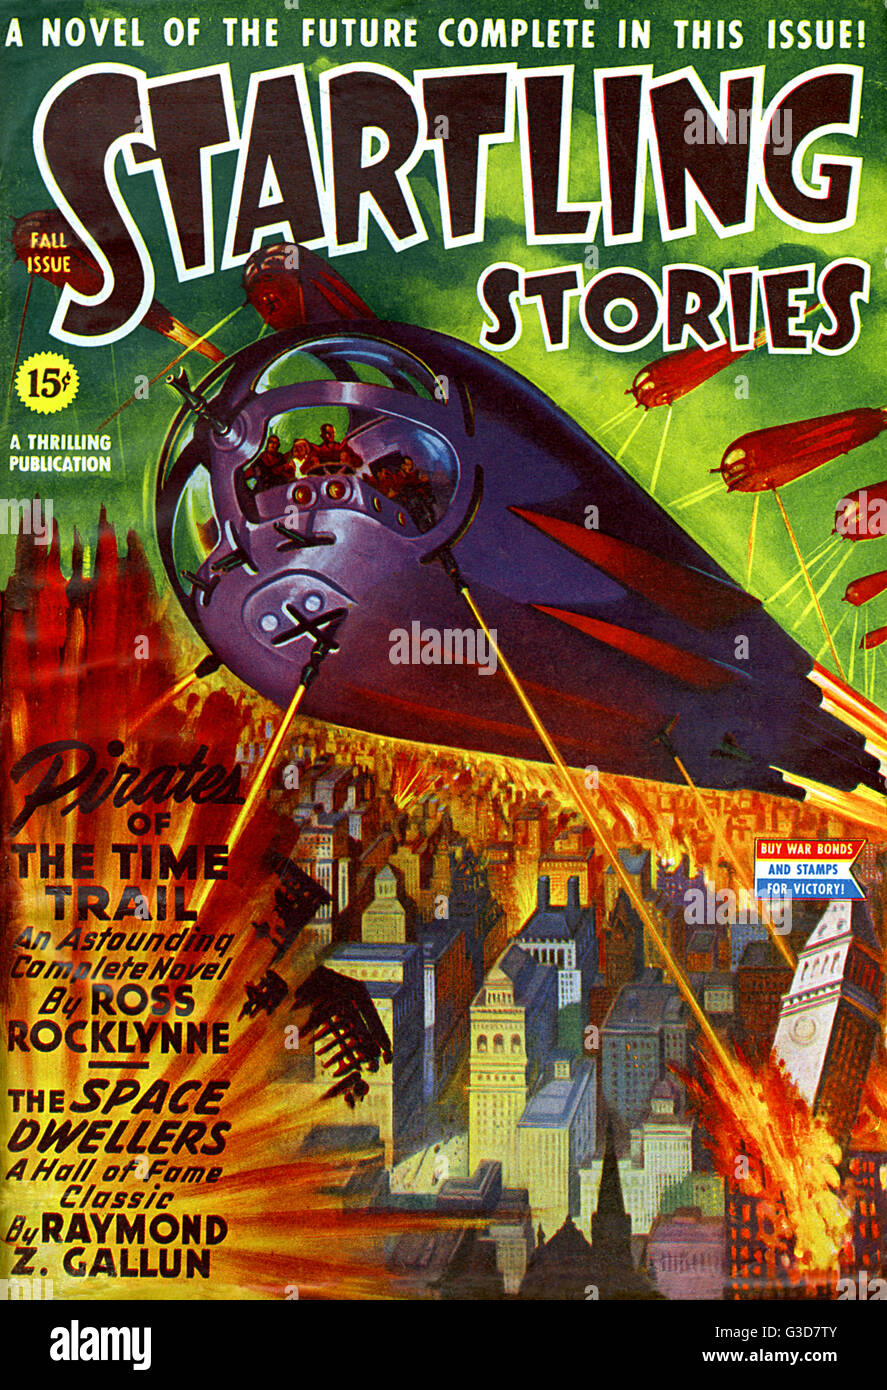 Startling Stories - Sci Fi Mag - Pirates of the Time Trail Stock Photo